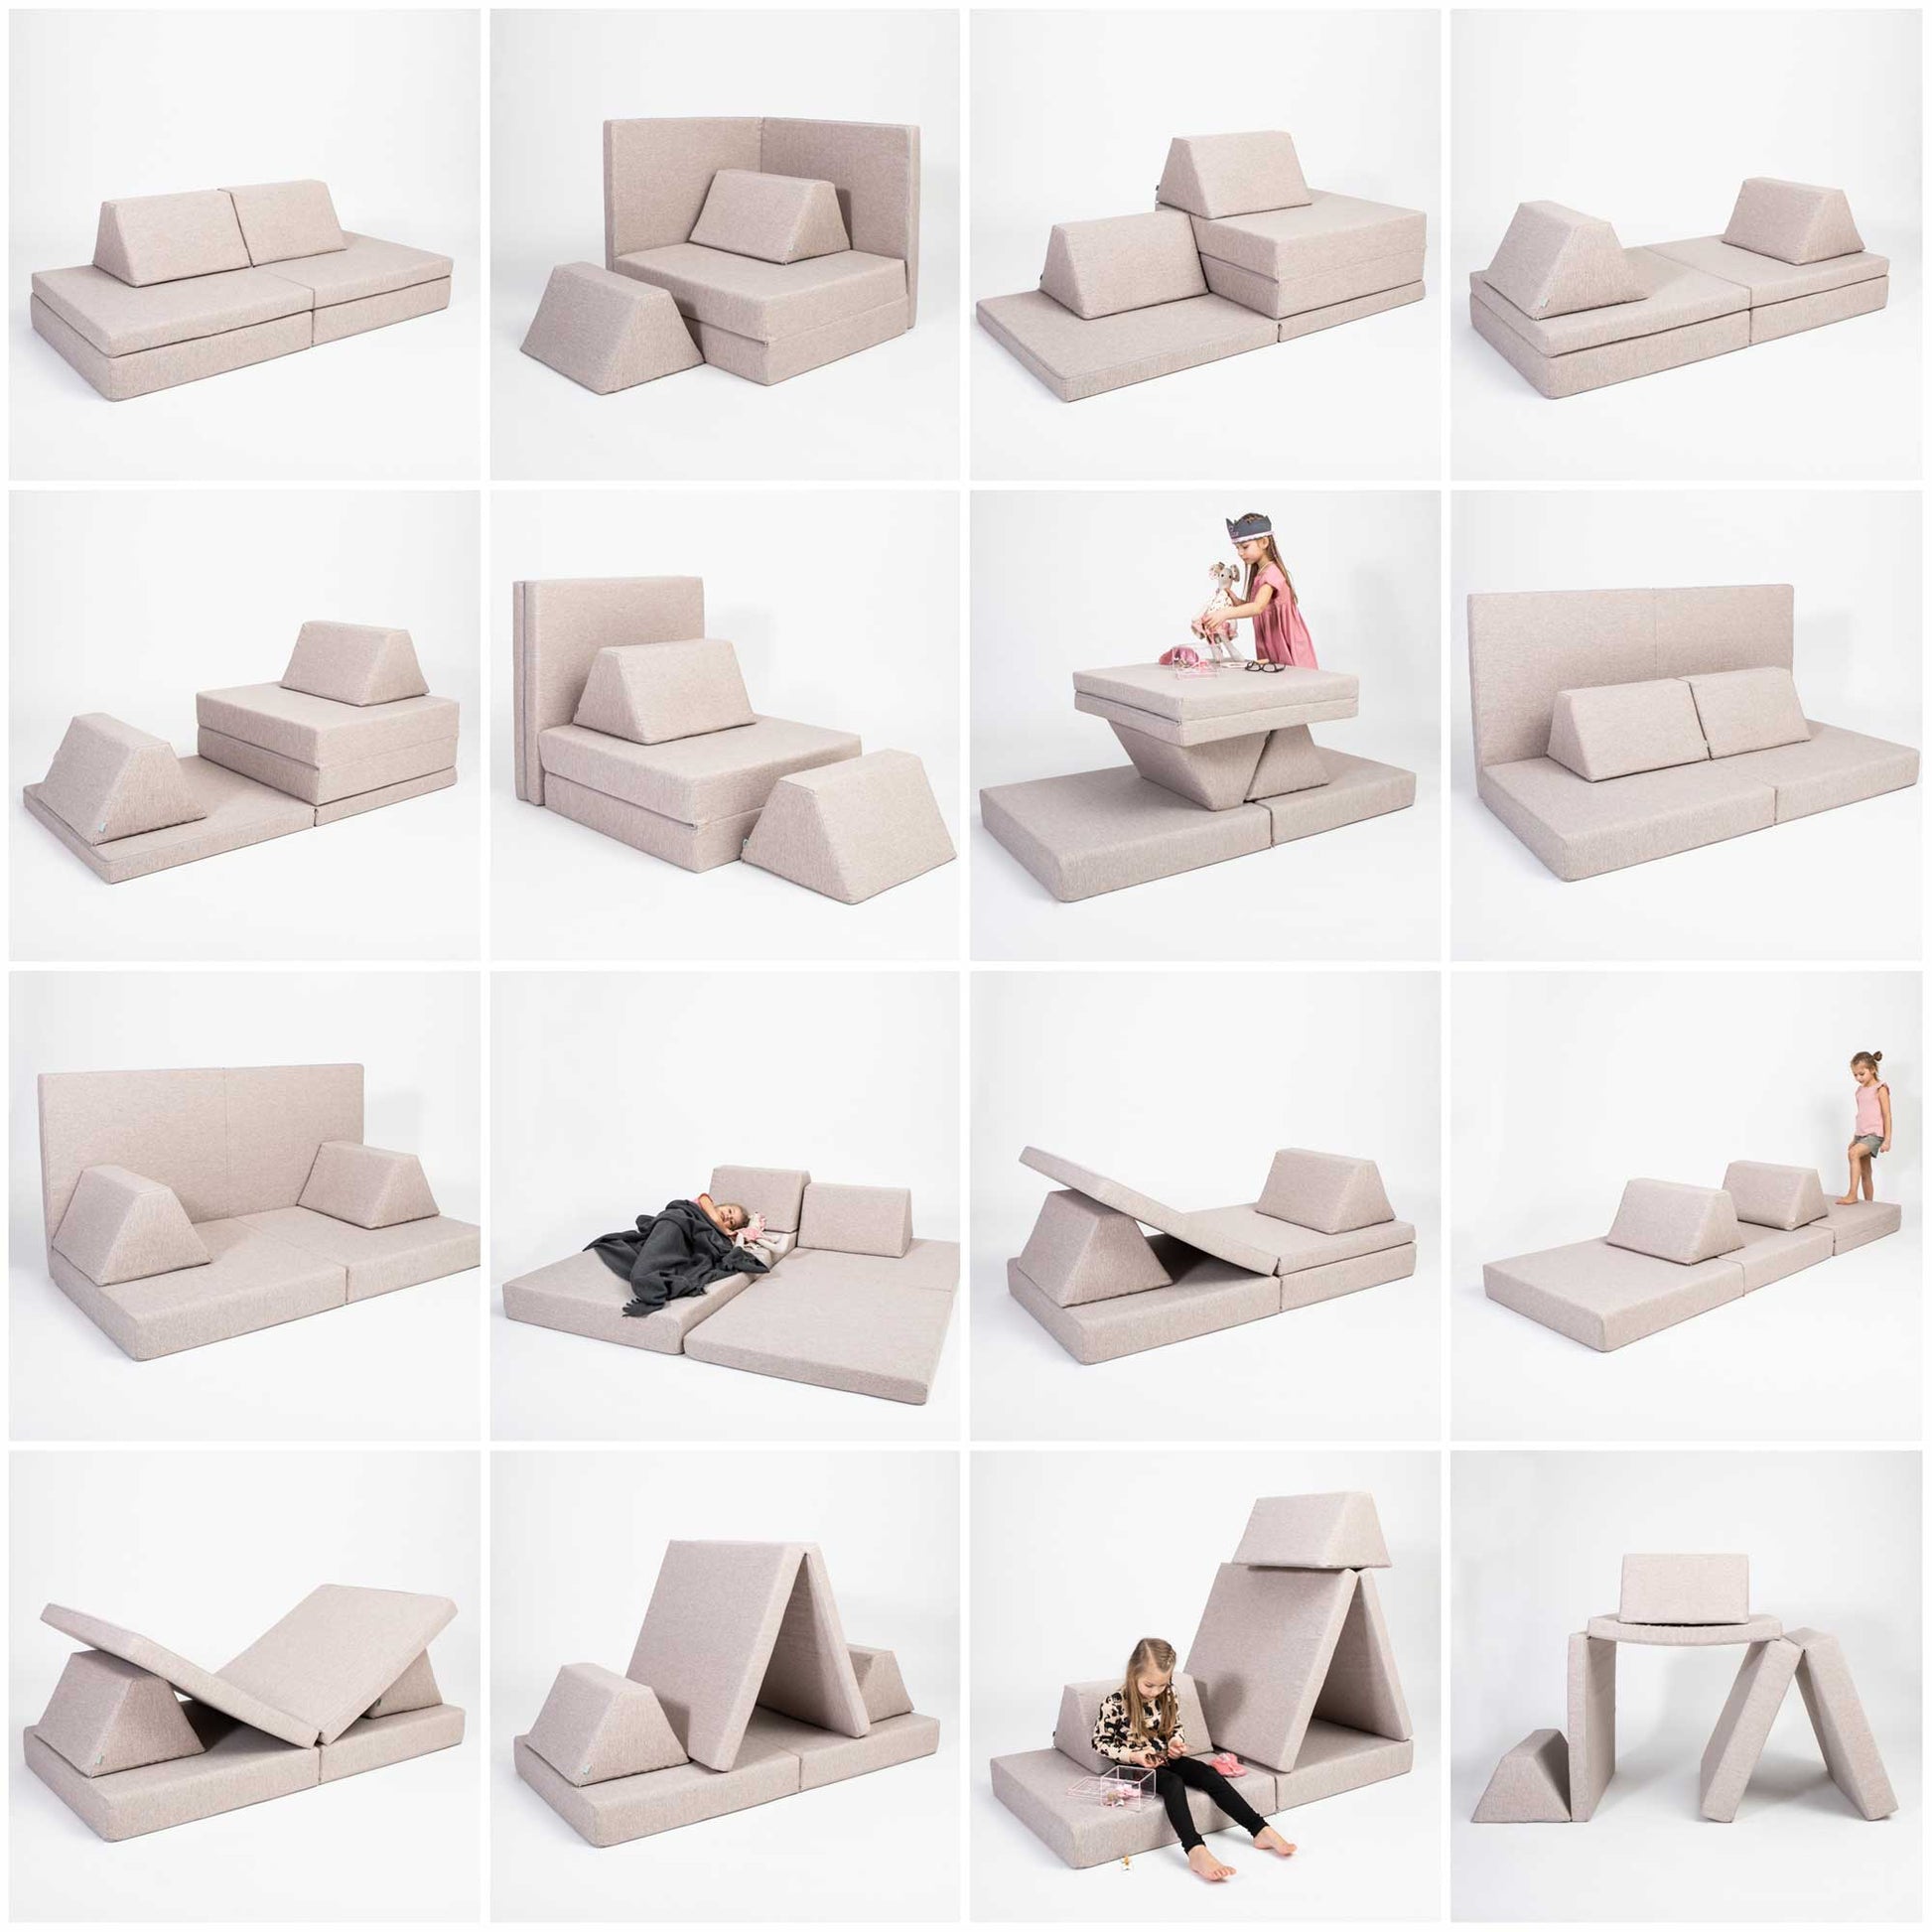 16 build ideas for a beige Monboxy play sofa set